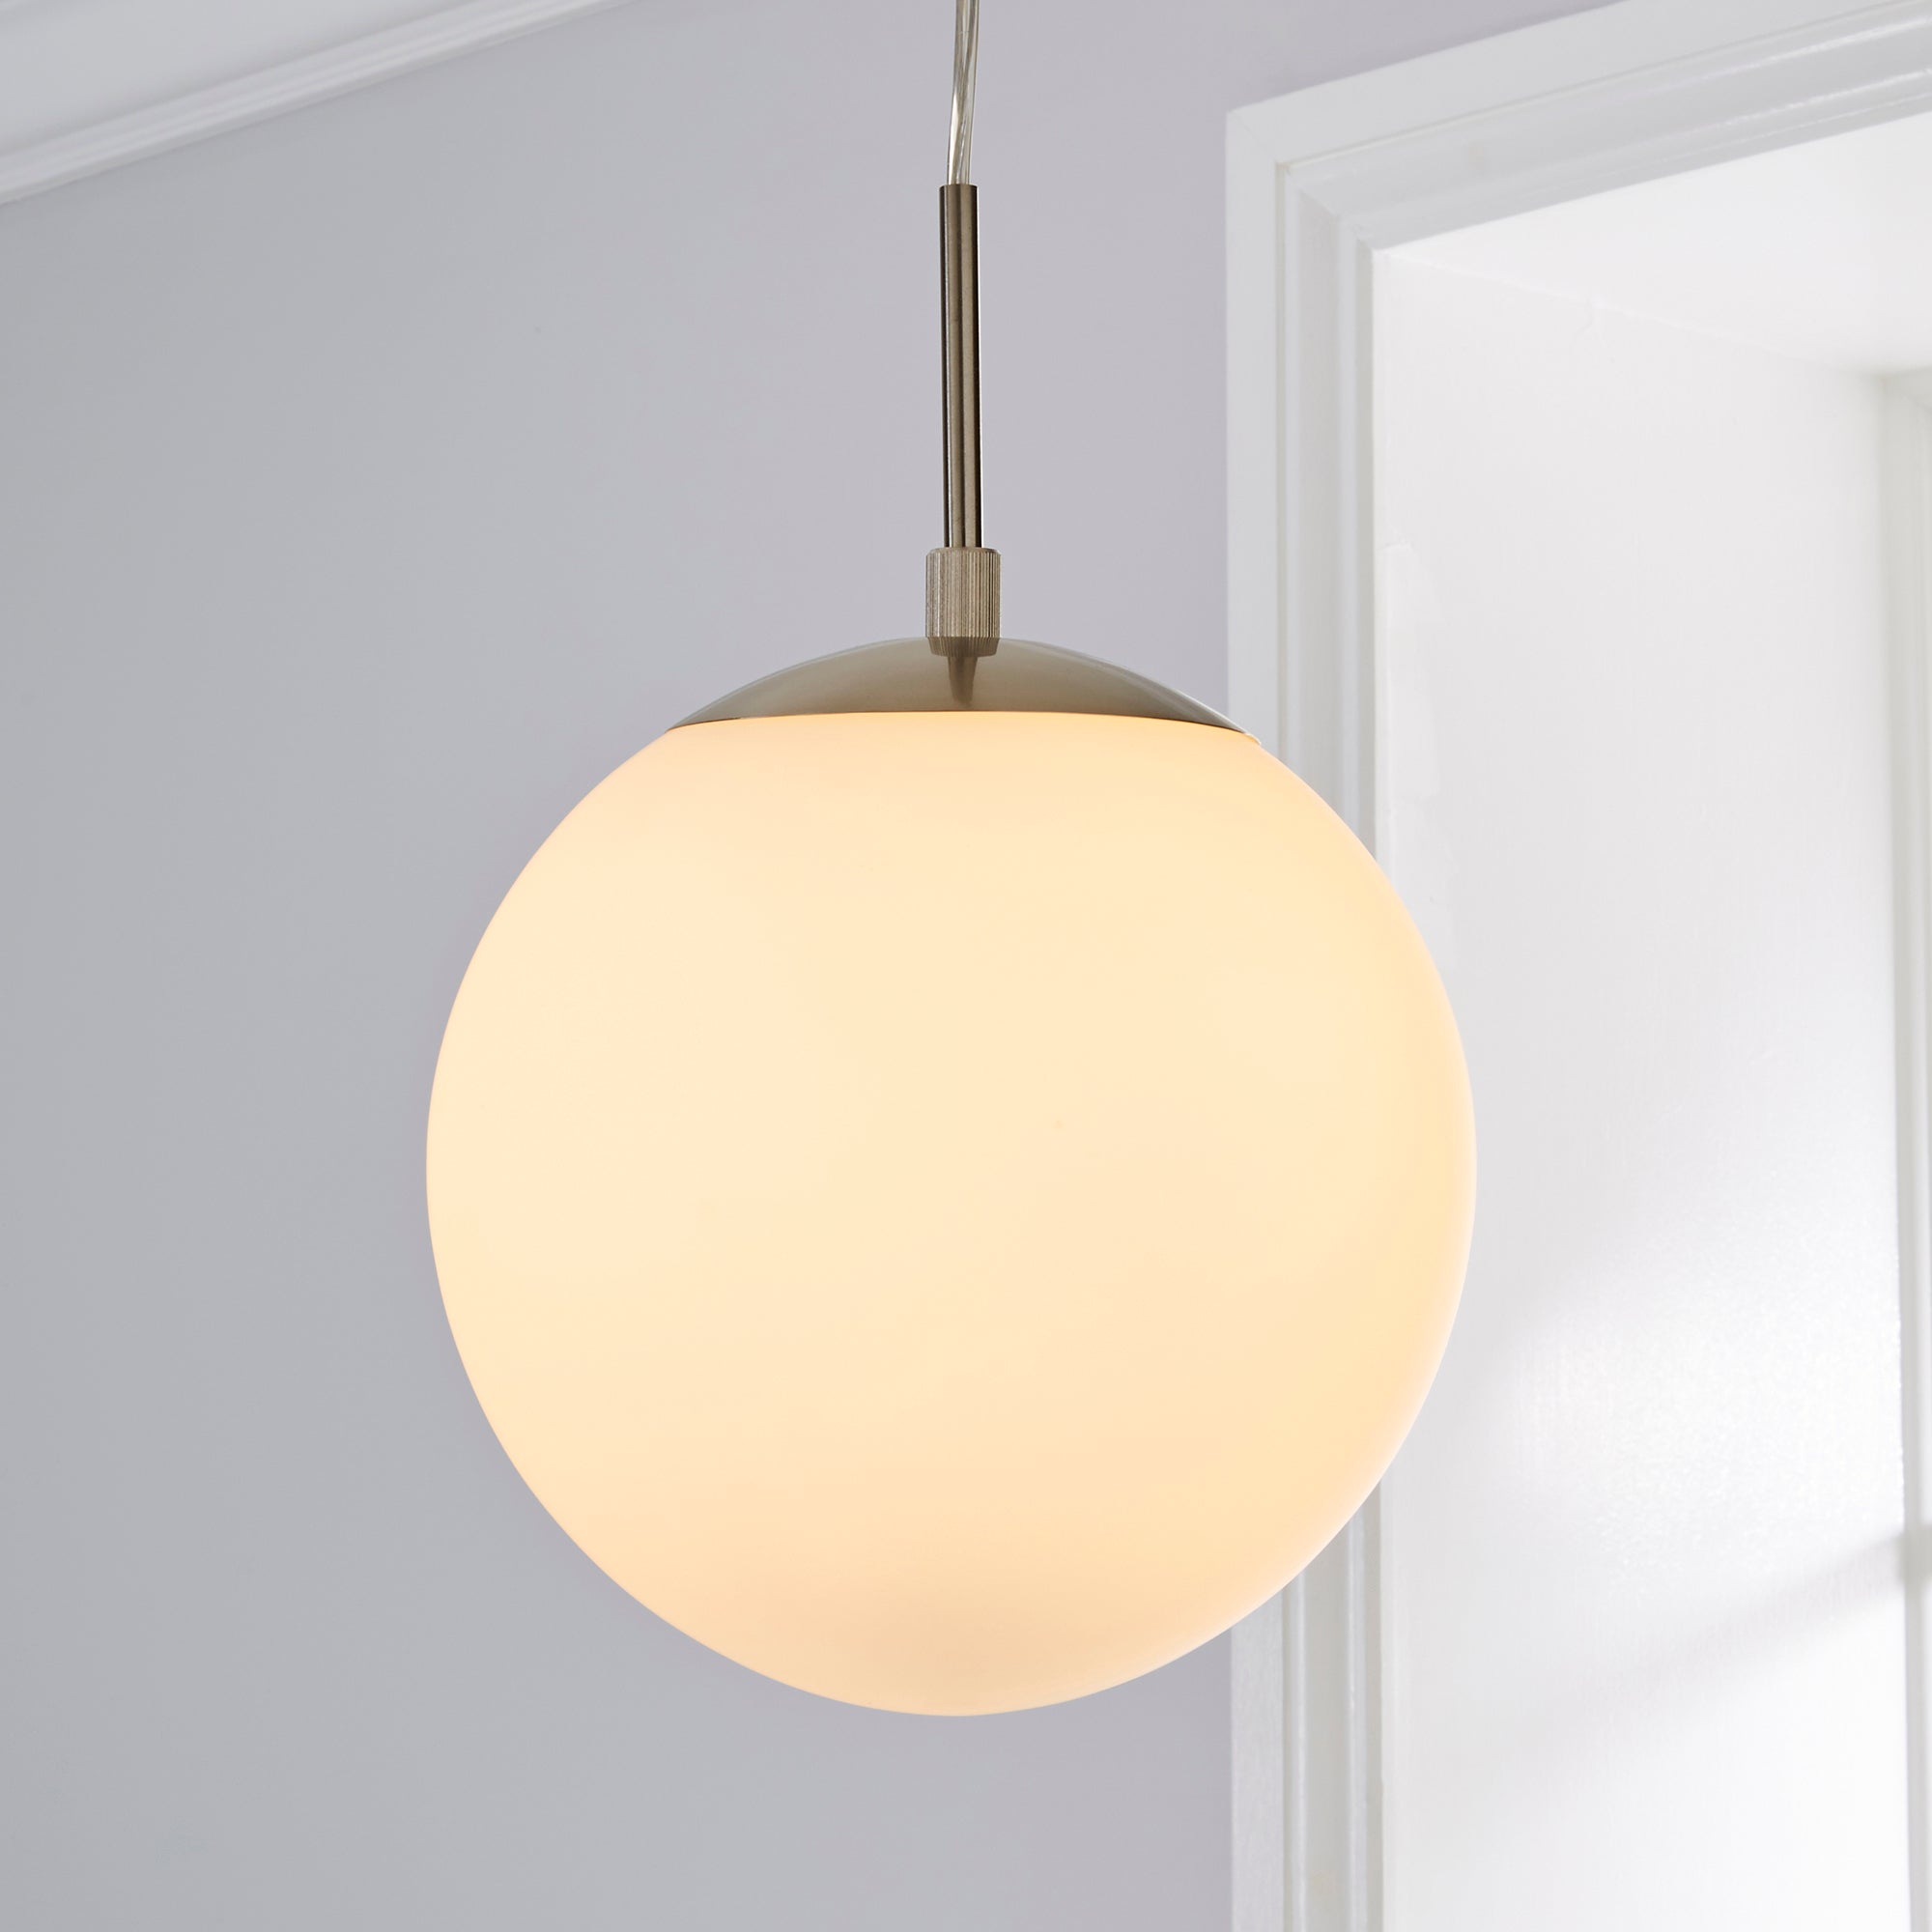 Hamptworth Dome Frosted Glass Pendant Light